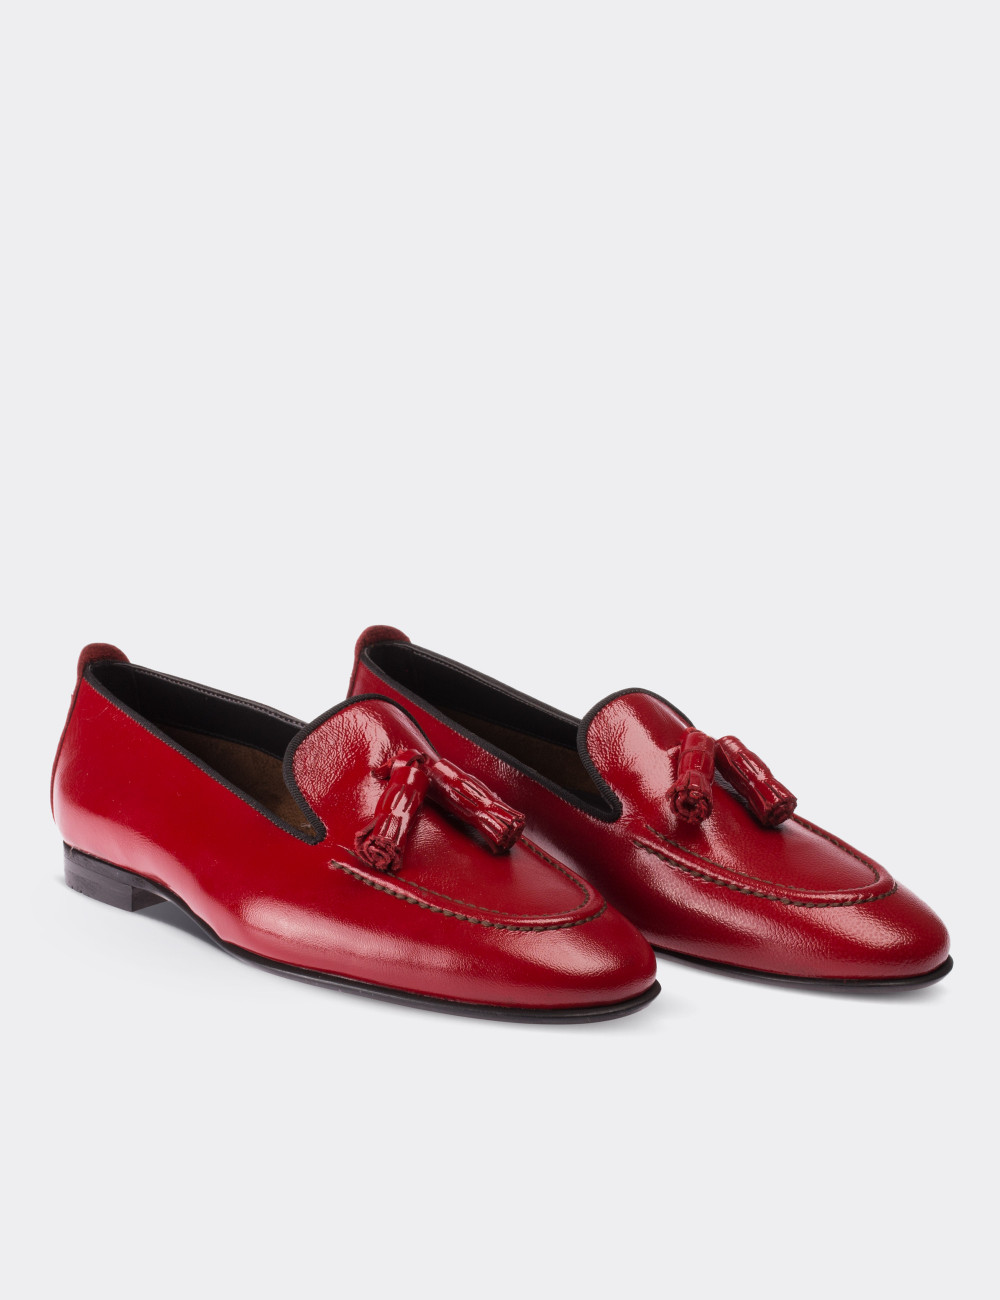 Red Patent Leather Loafers - 01619ZKRMM01